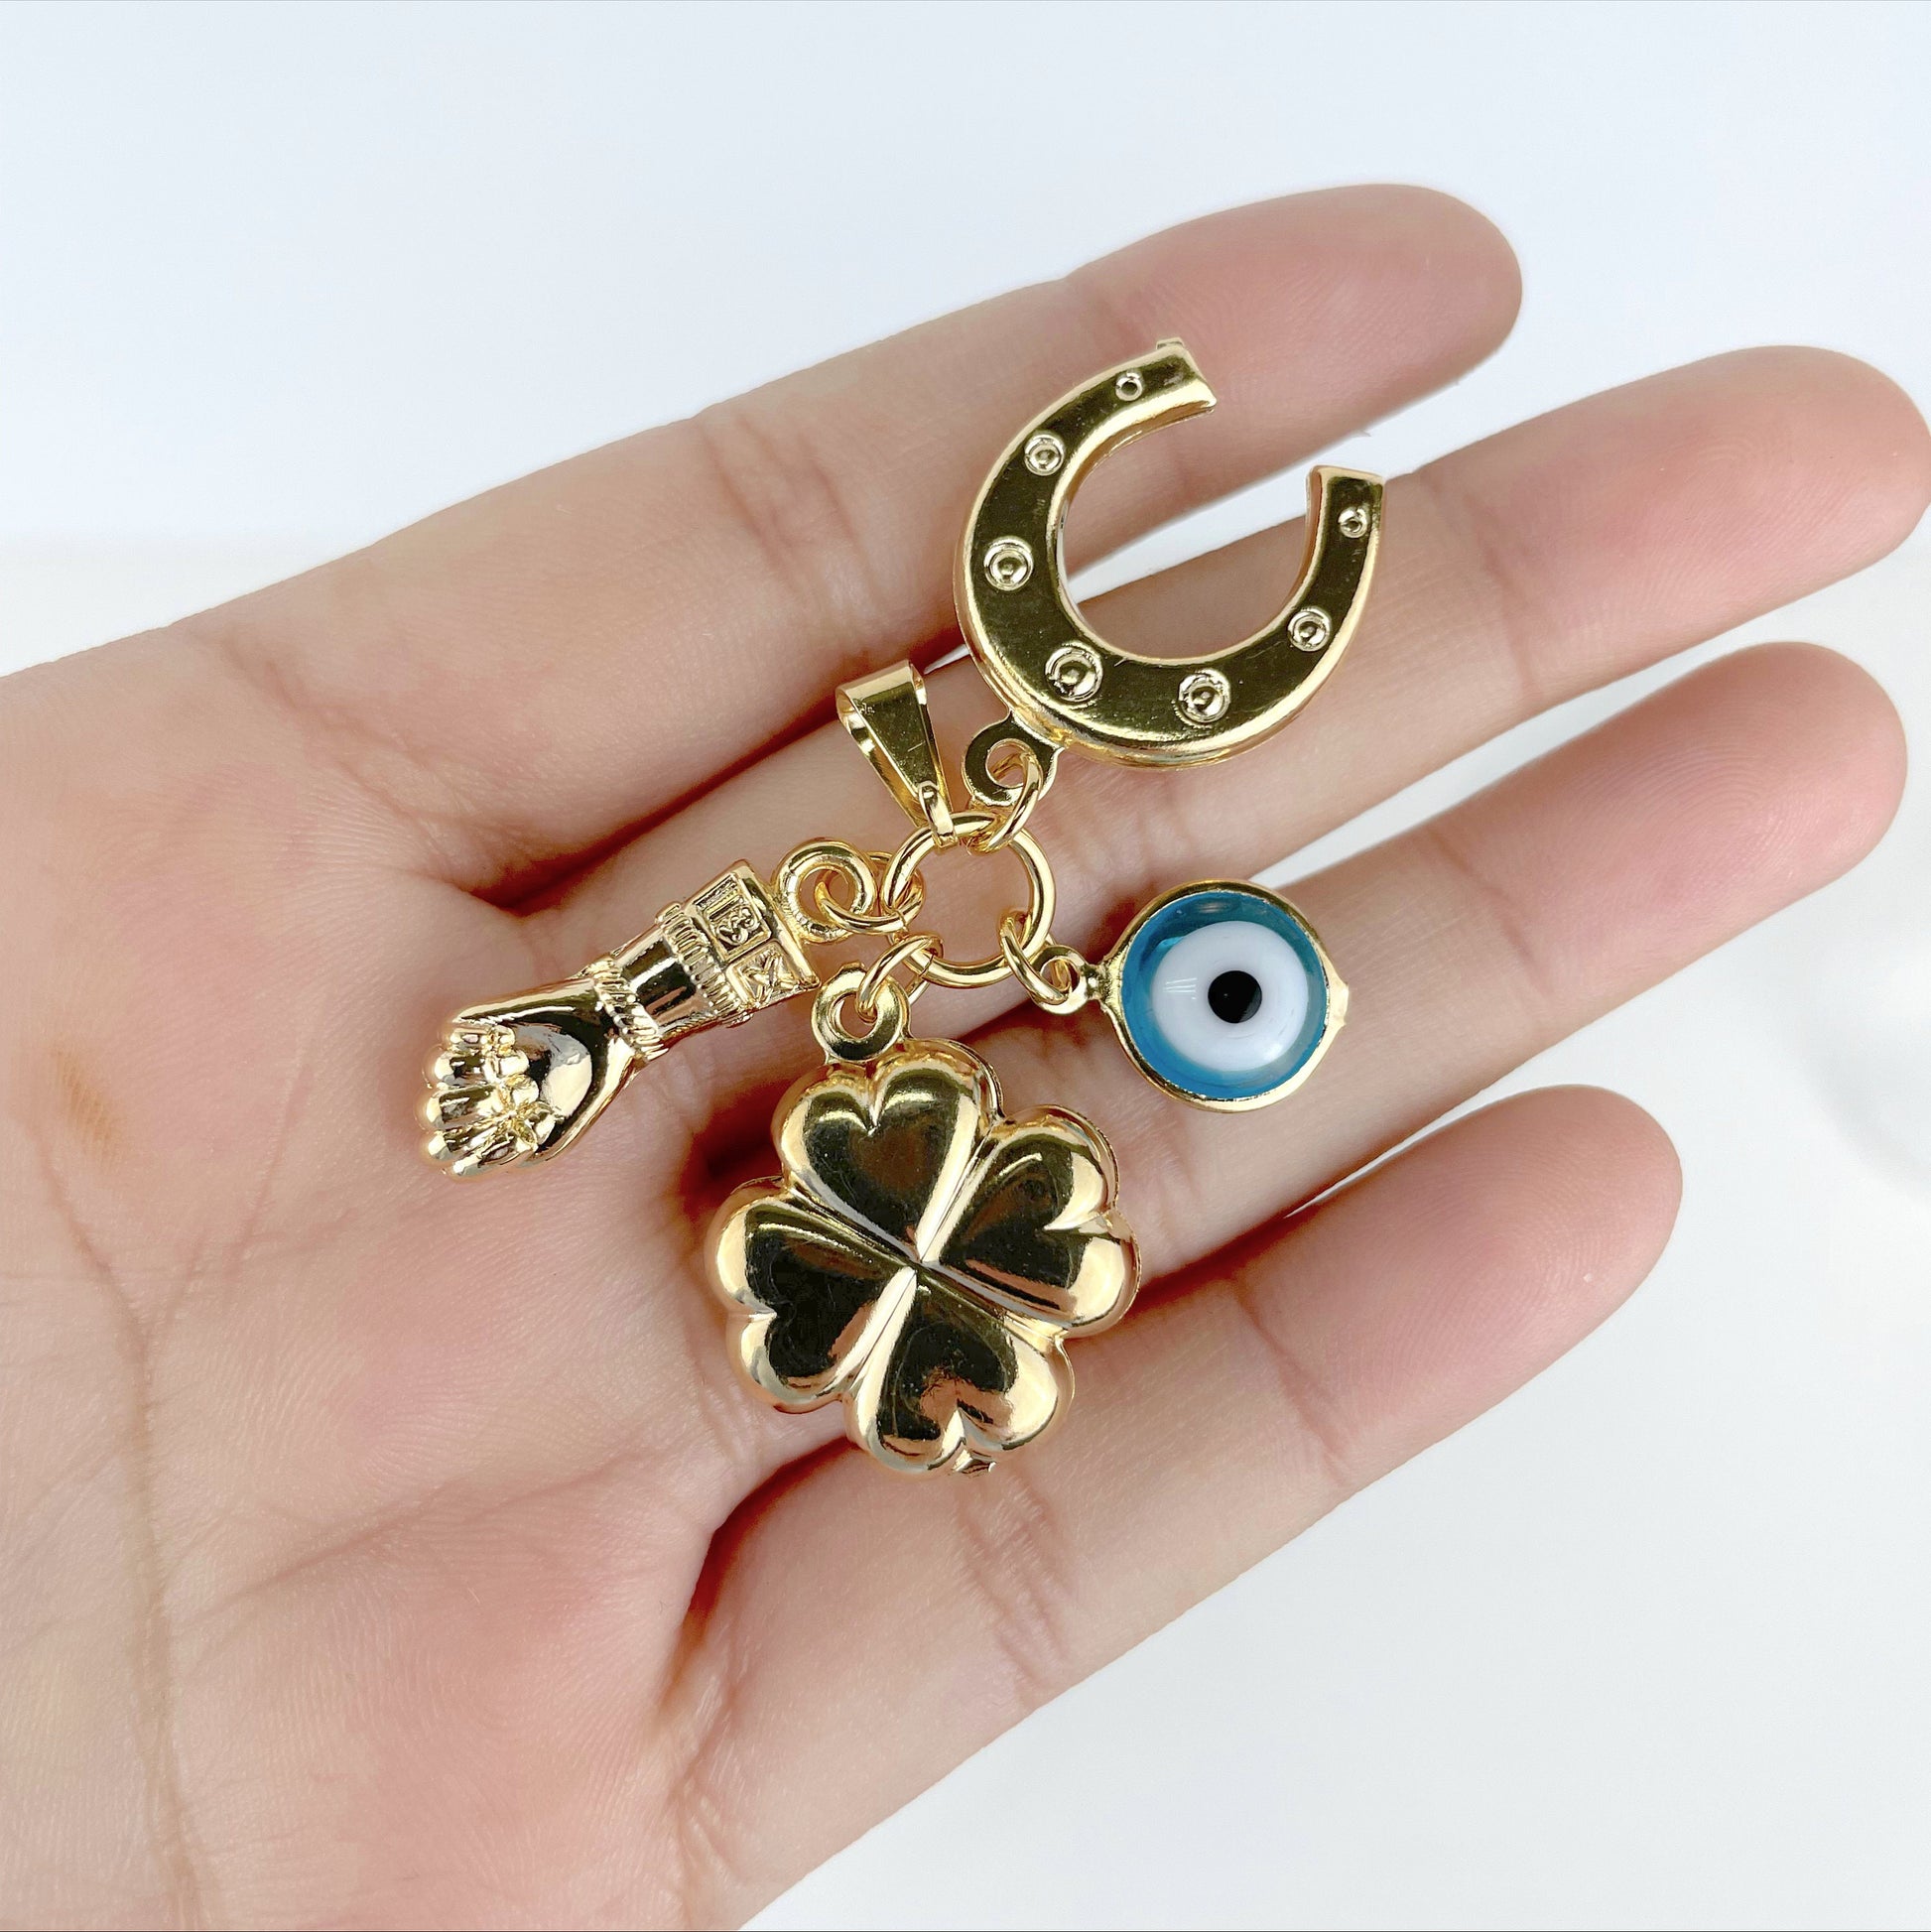 18k Gold Filled Figa Hand, Clover, Horseshoes, Evil Eye, Greek Eye Charm Pendant, Lucky Protection, Wholesale Jewelry Making Supplies